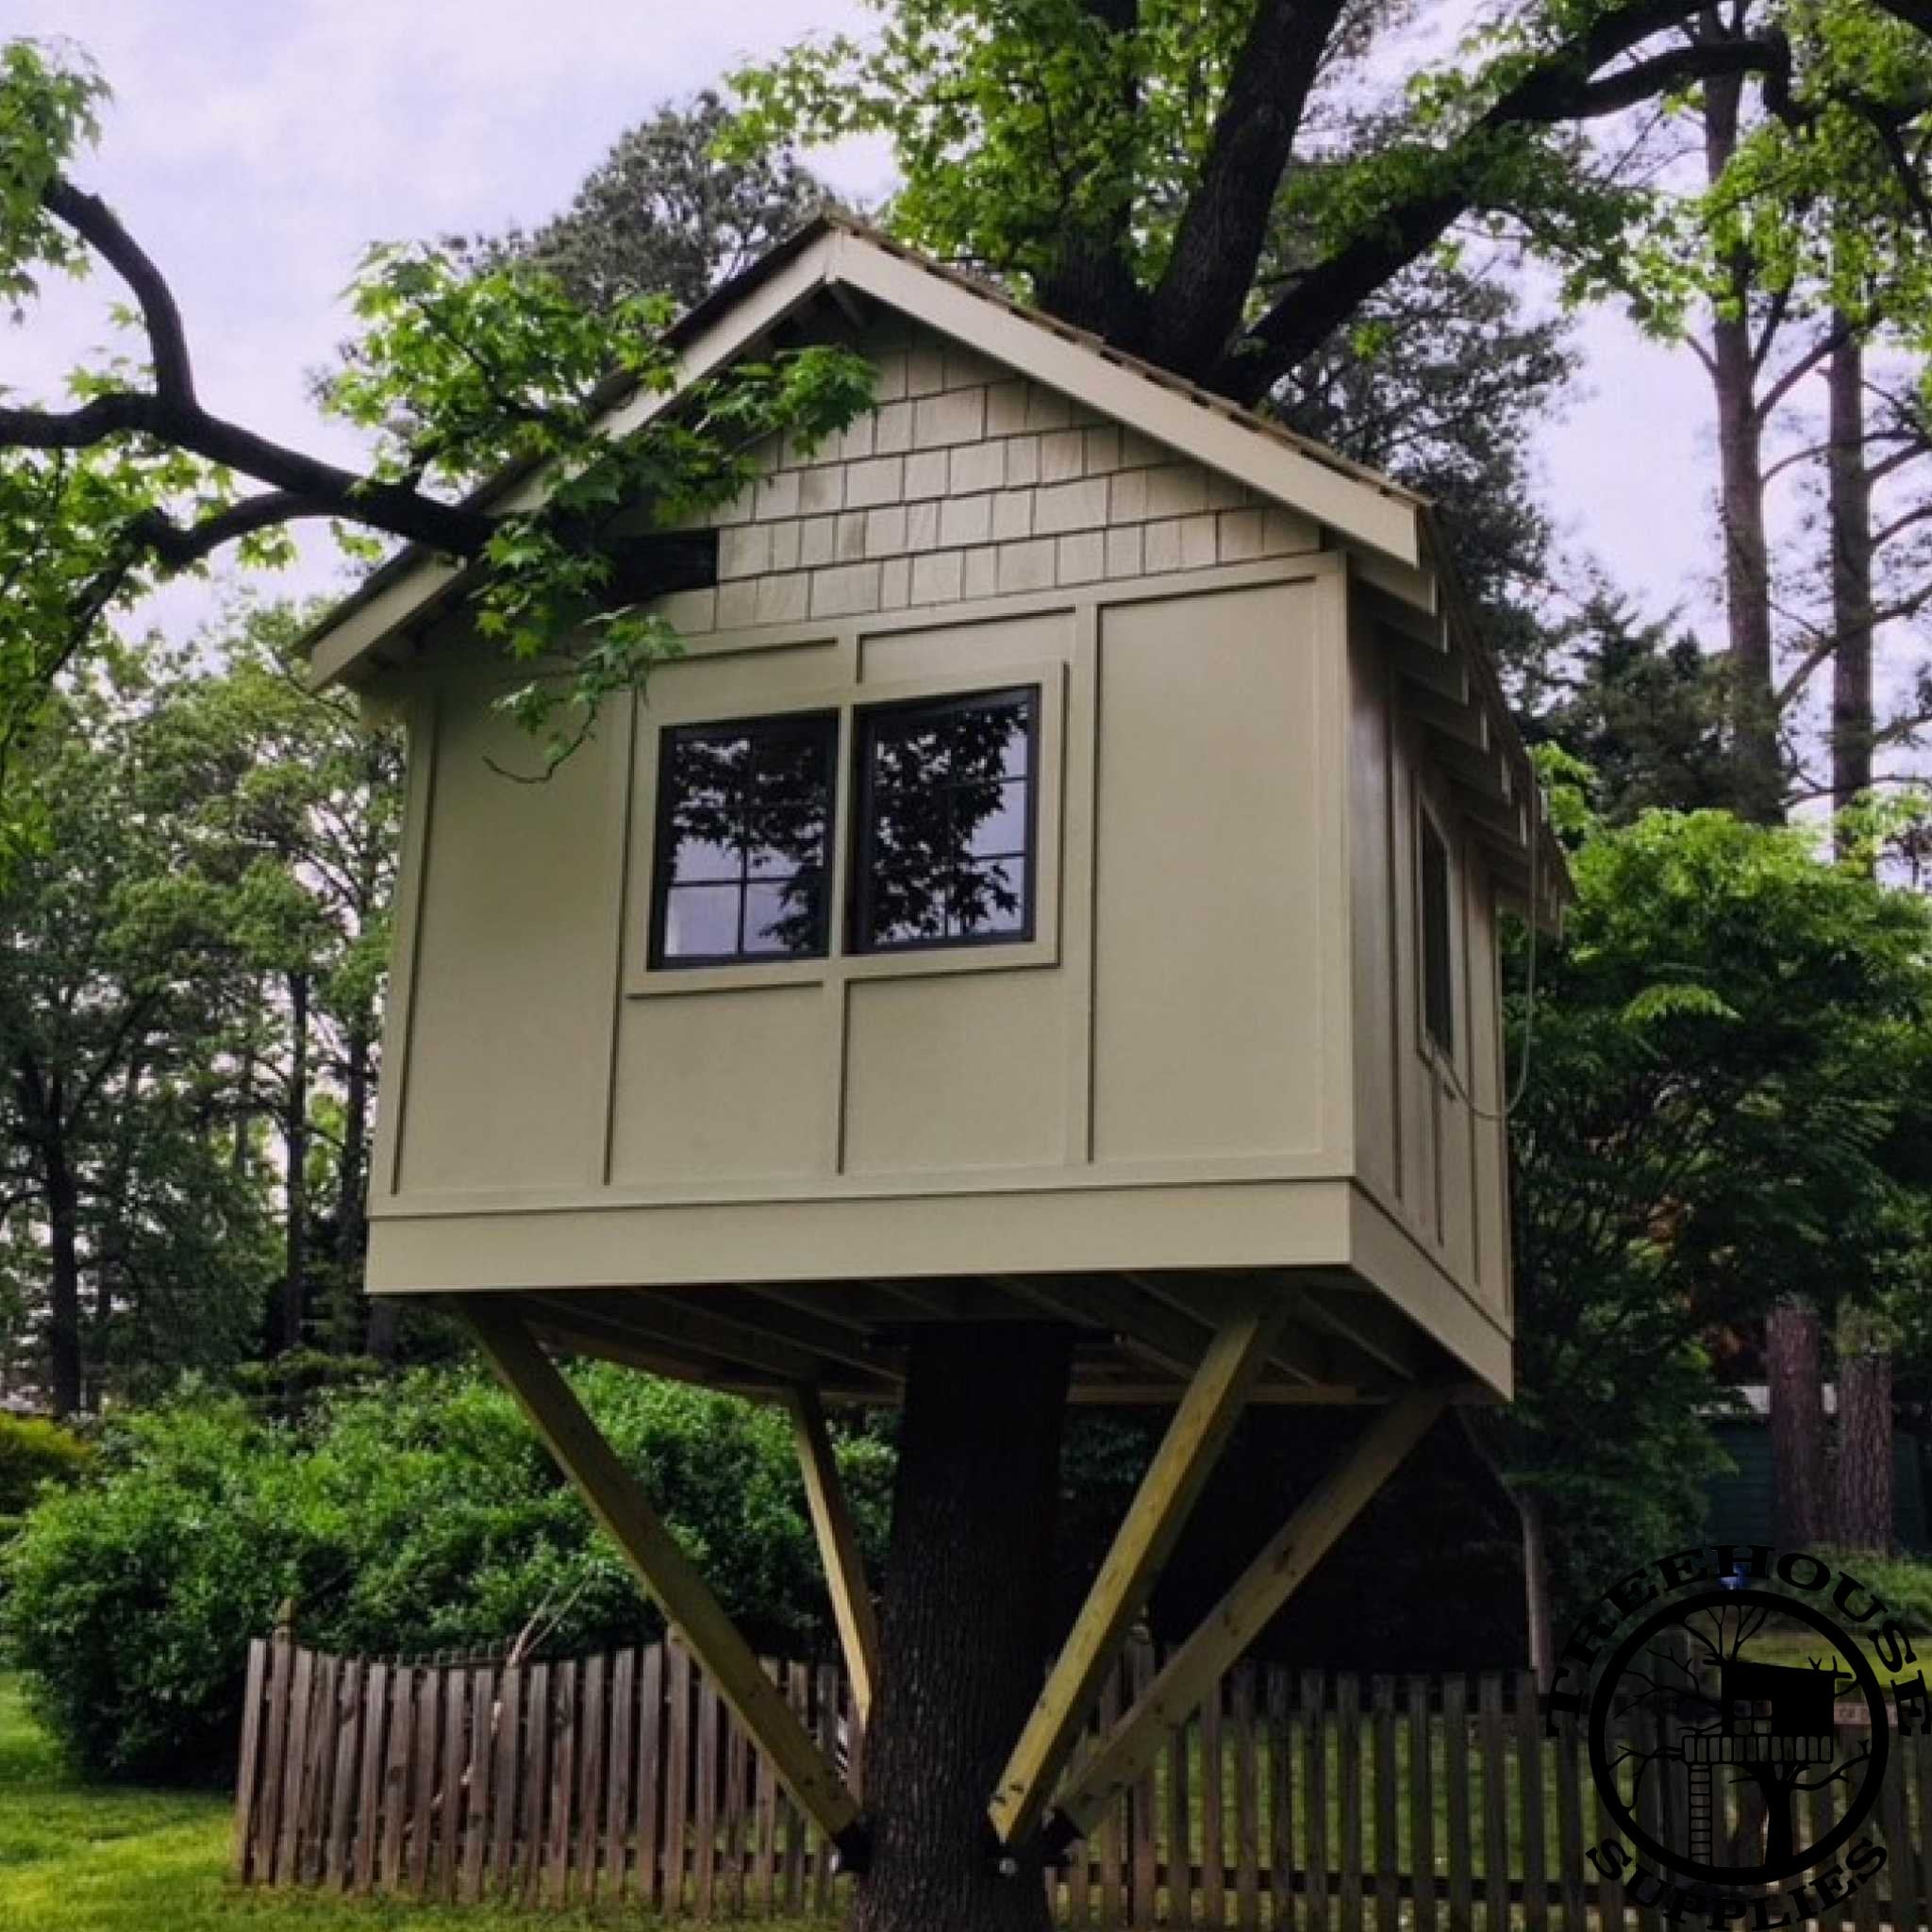 6' SQUARE TREEHOUSE PLAN - NOW INCLUDES STEP-BY-STEP 3D MODELING!! - Treehouse Supplies